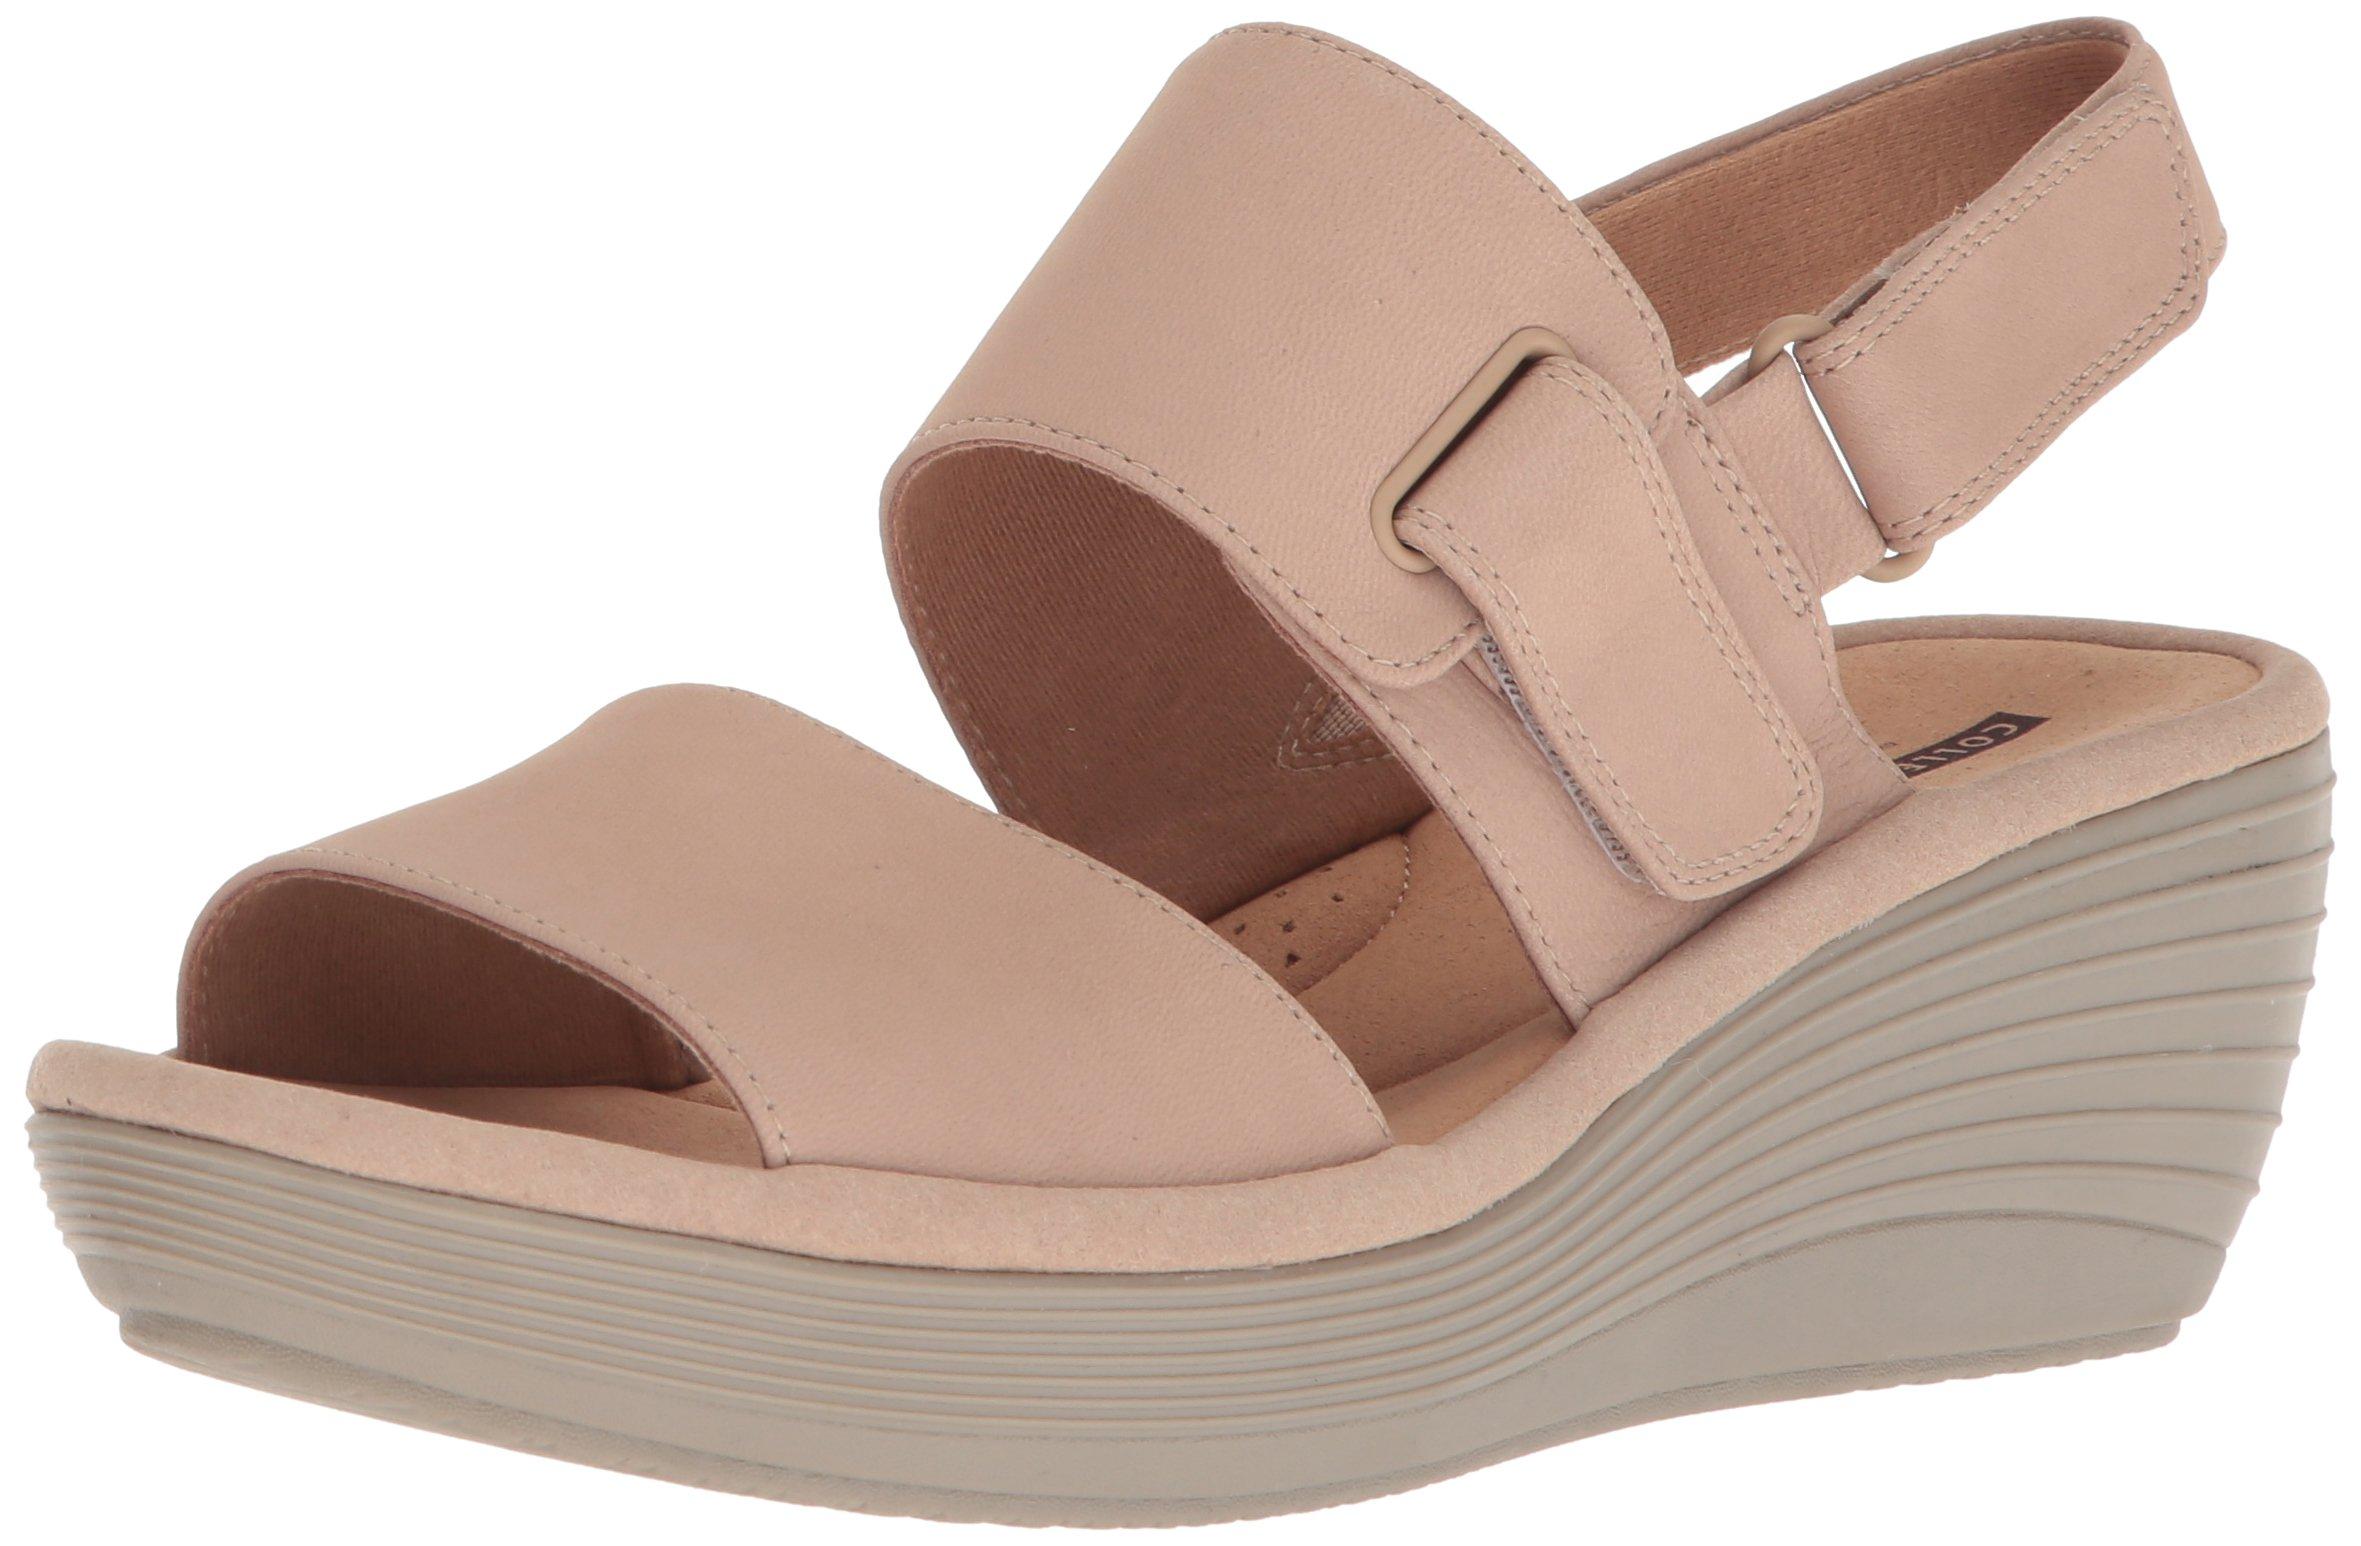 clarks reedly willow